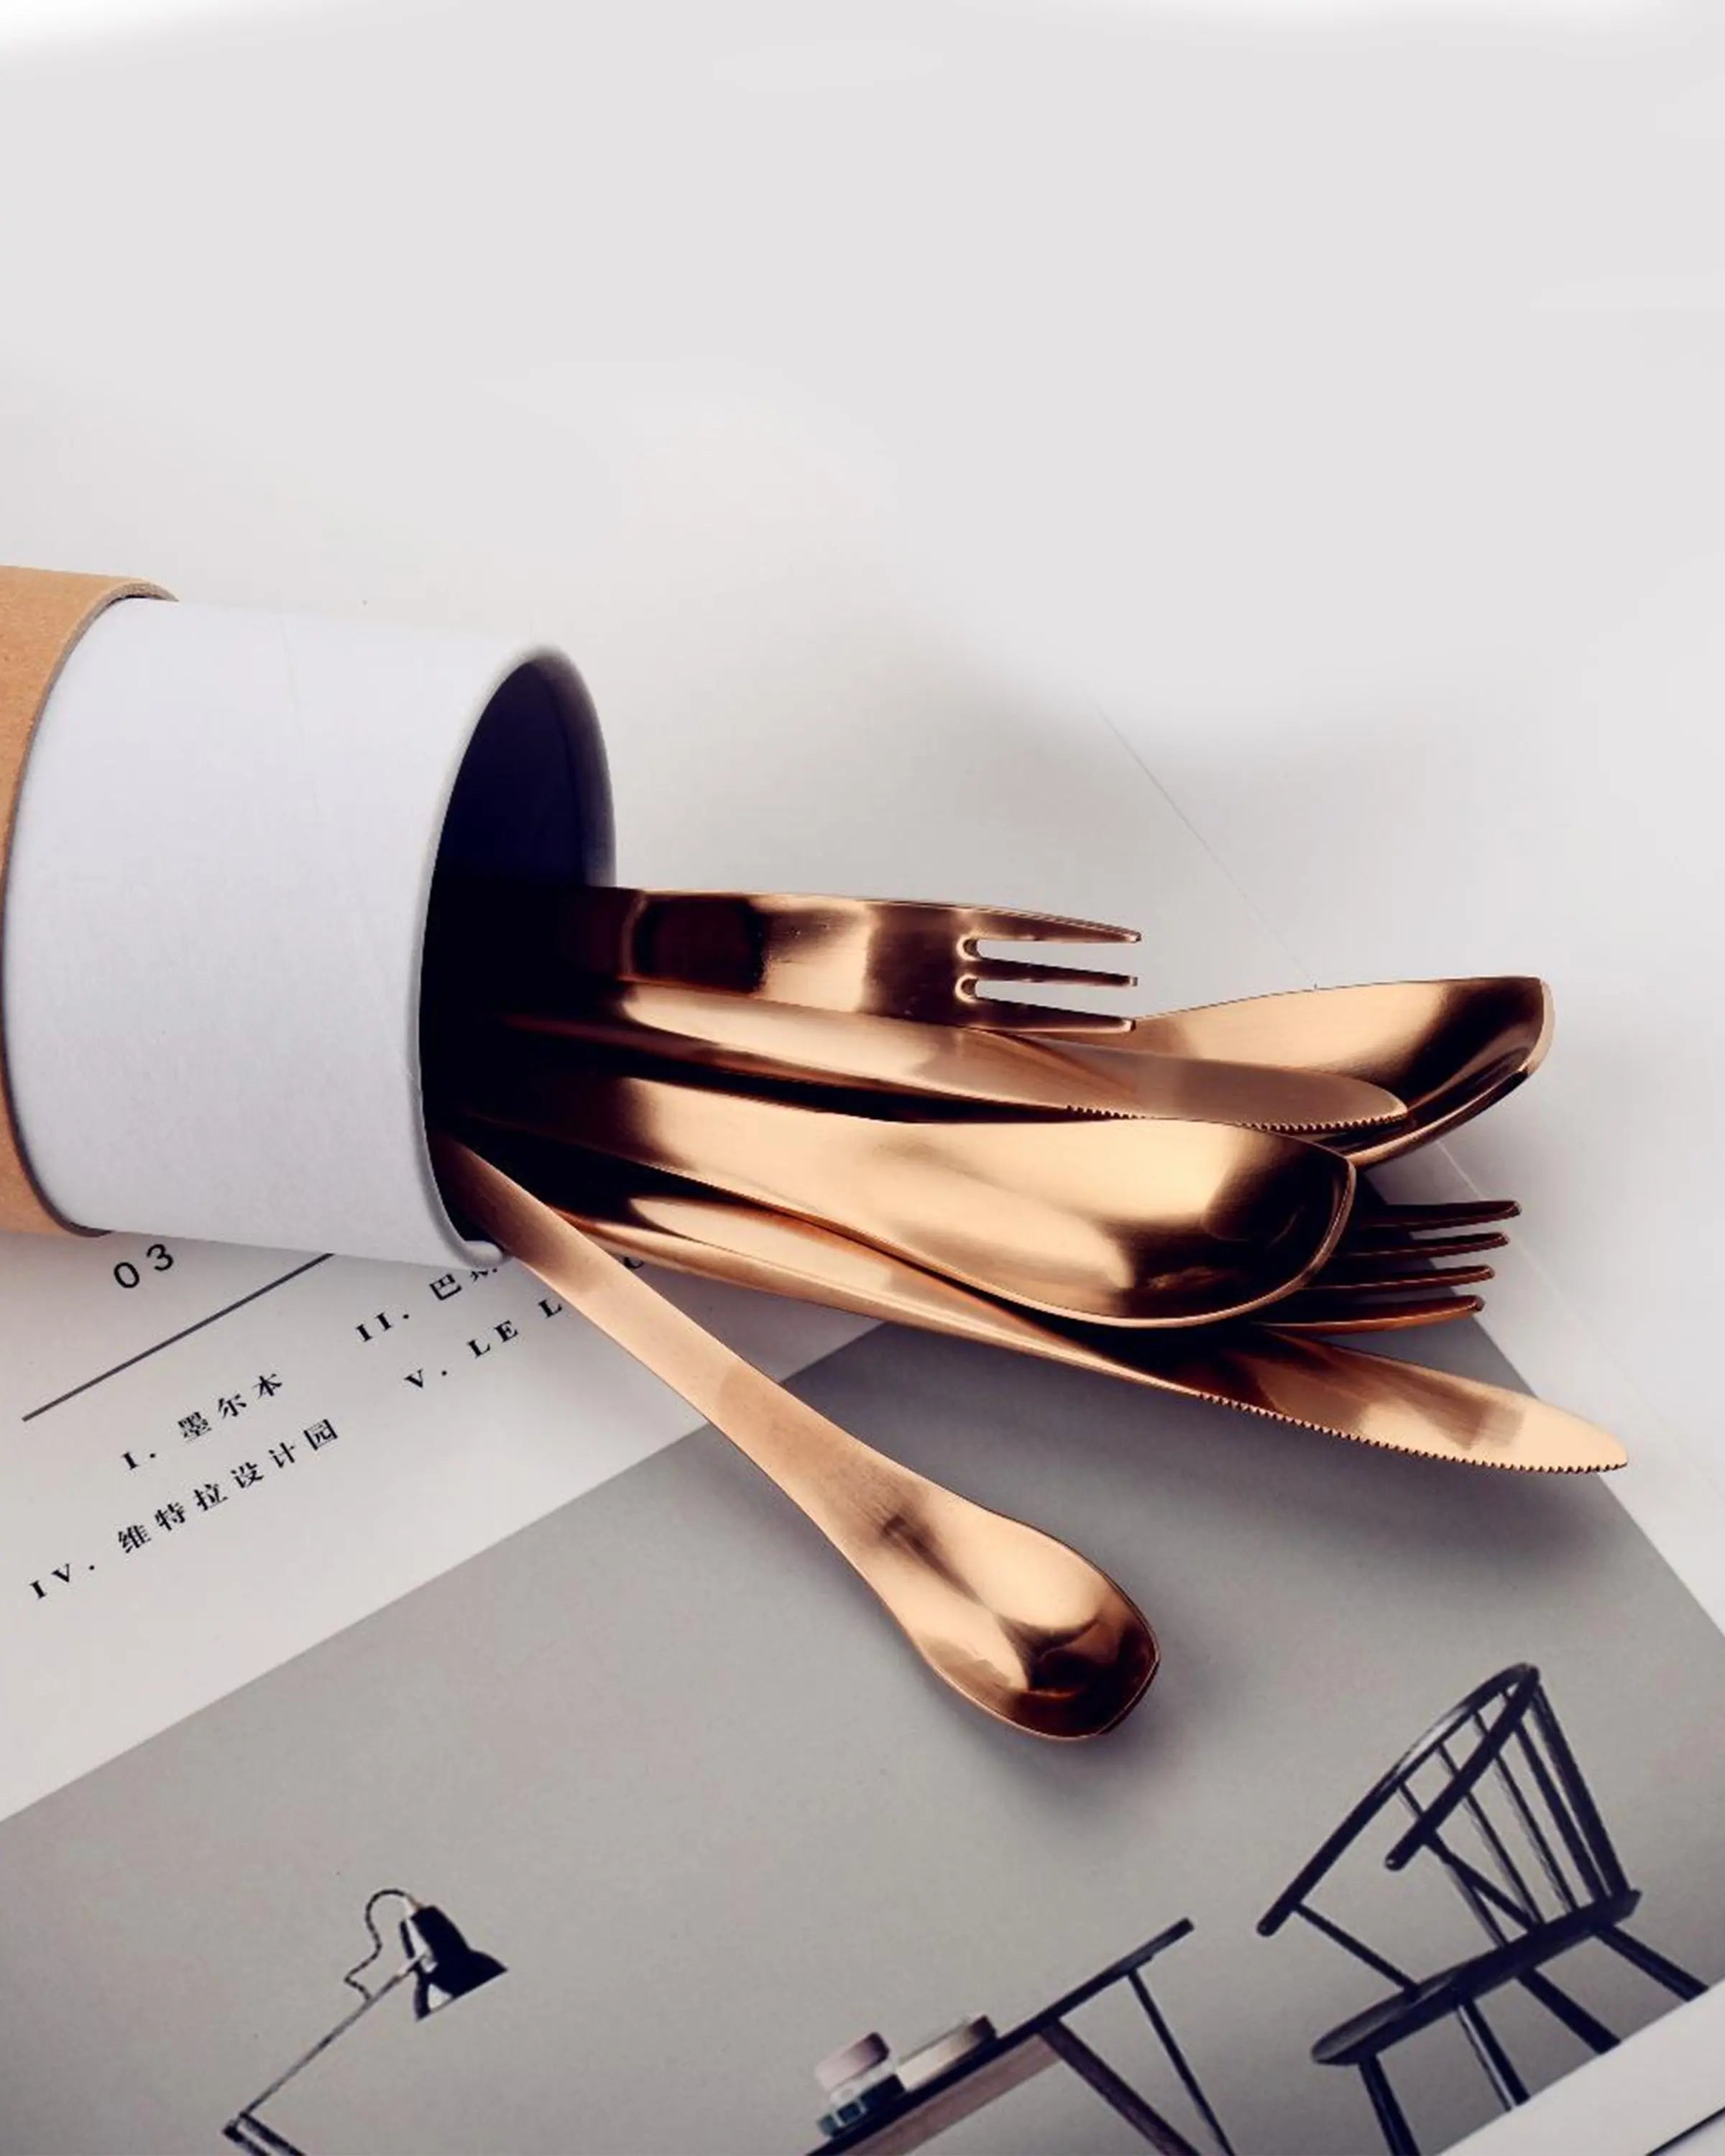 Berli Mate Rose Gold & Black Cutlery ANGIE HOMES